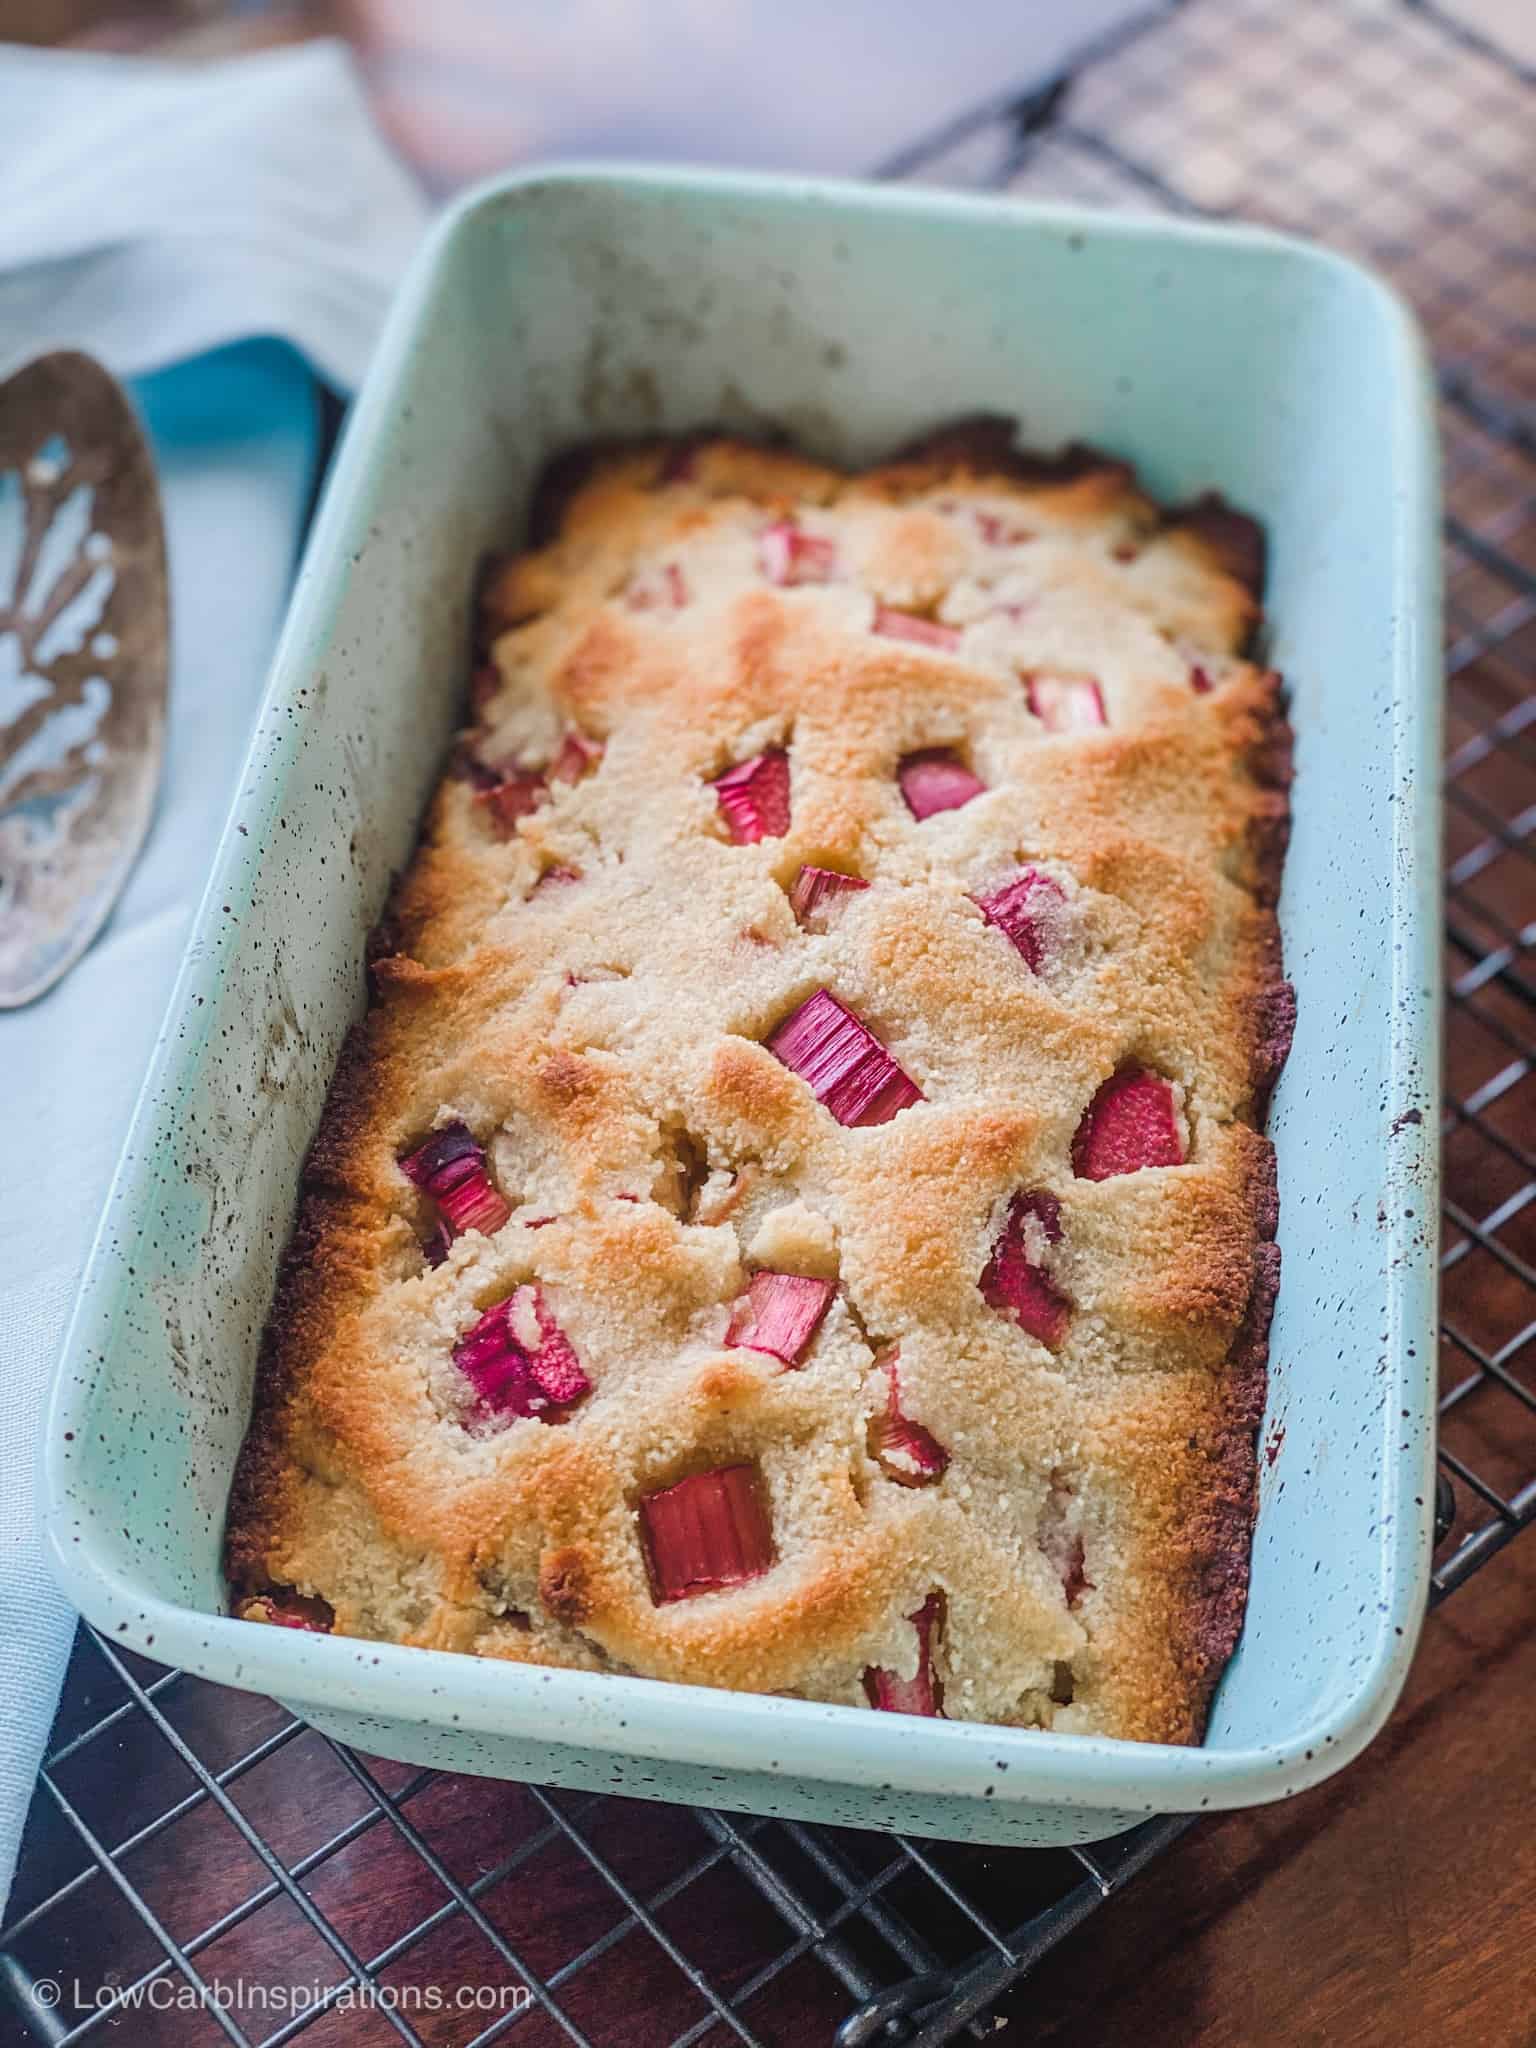 Keto Rhubarb Bread Recipe with a Glaze Topping